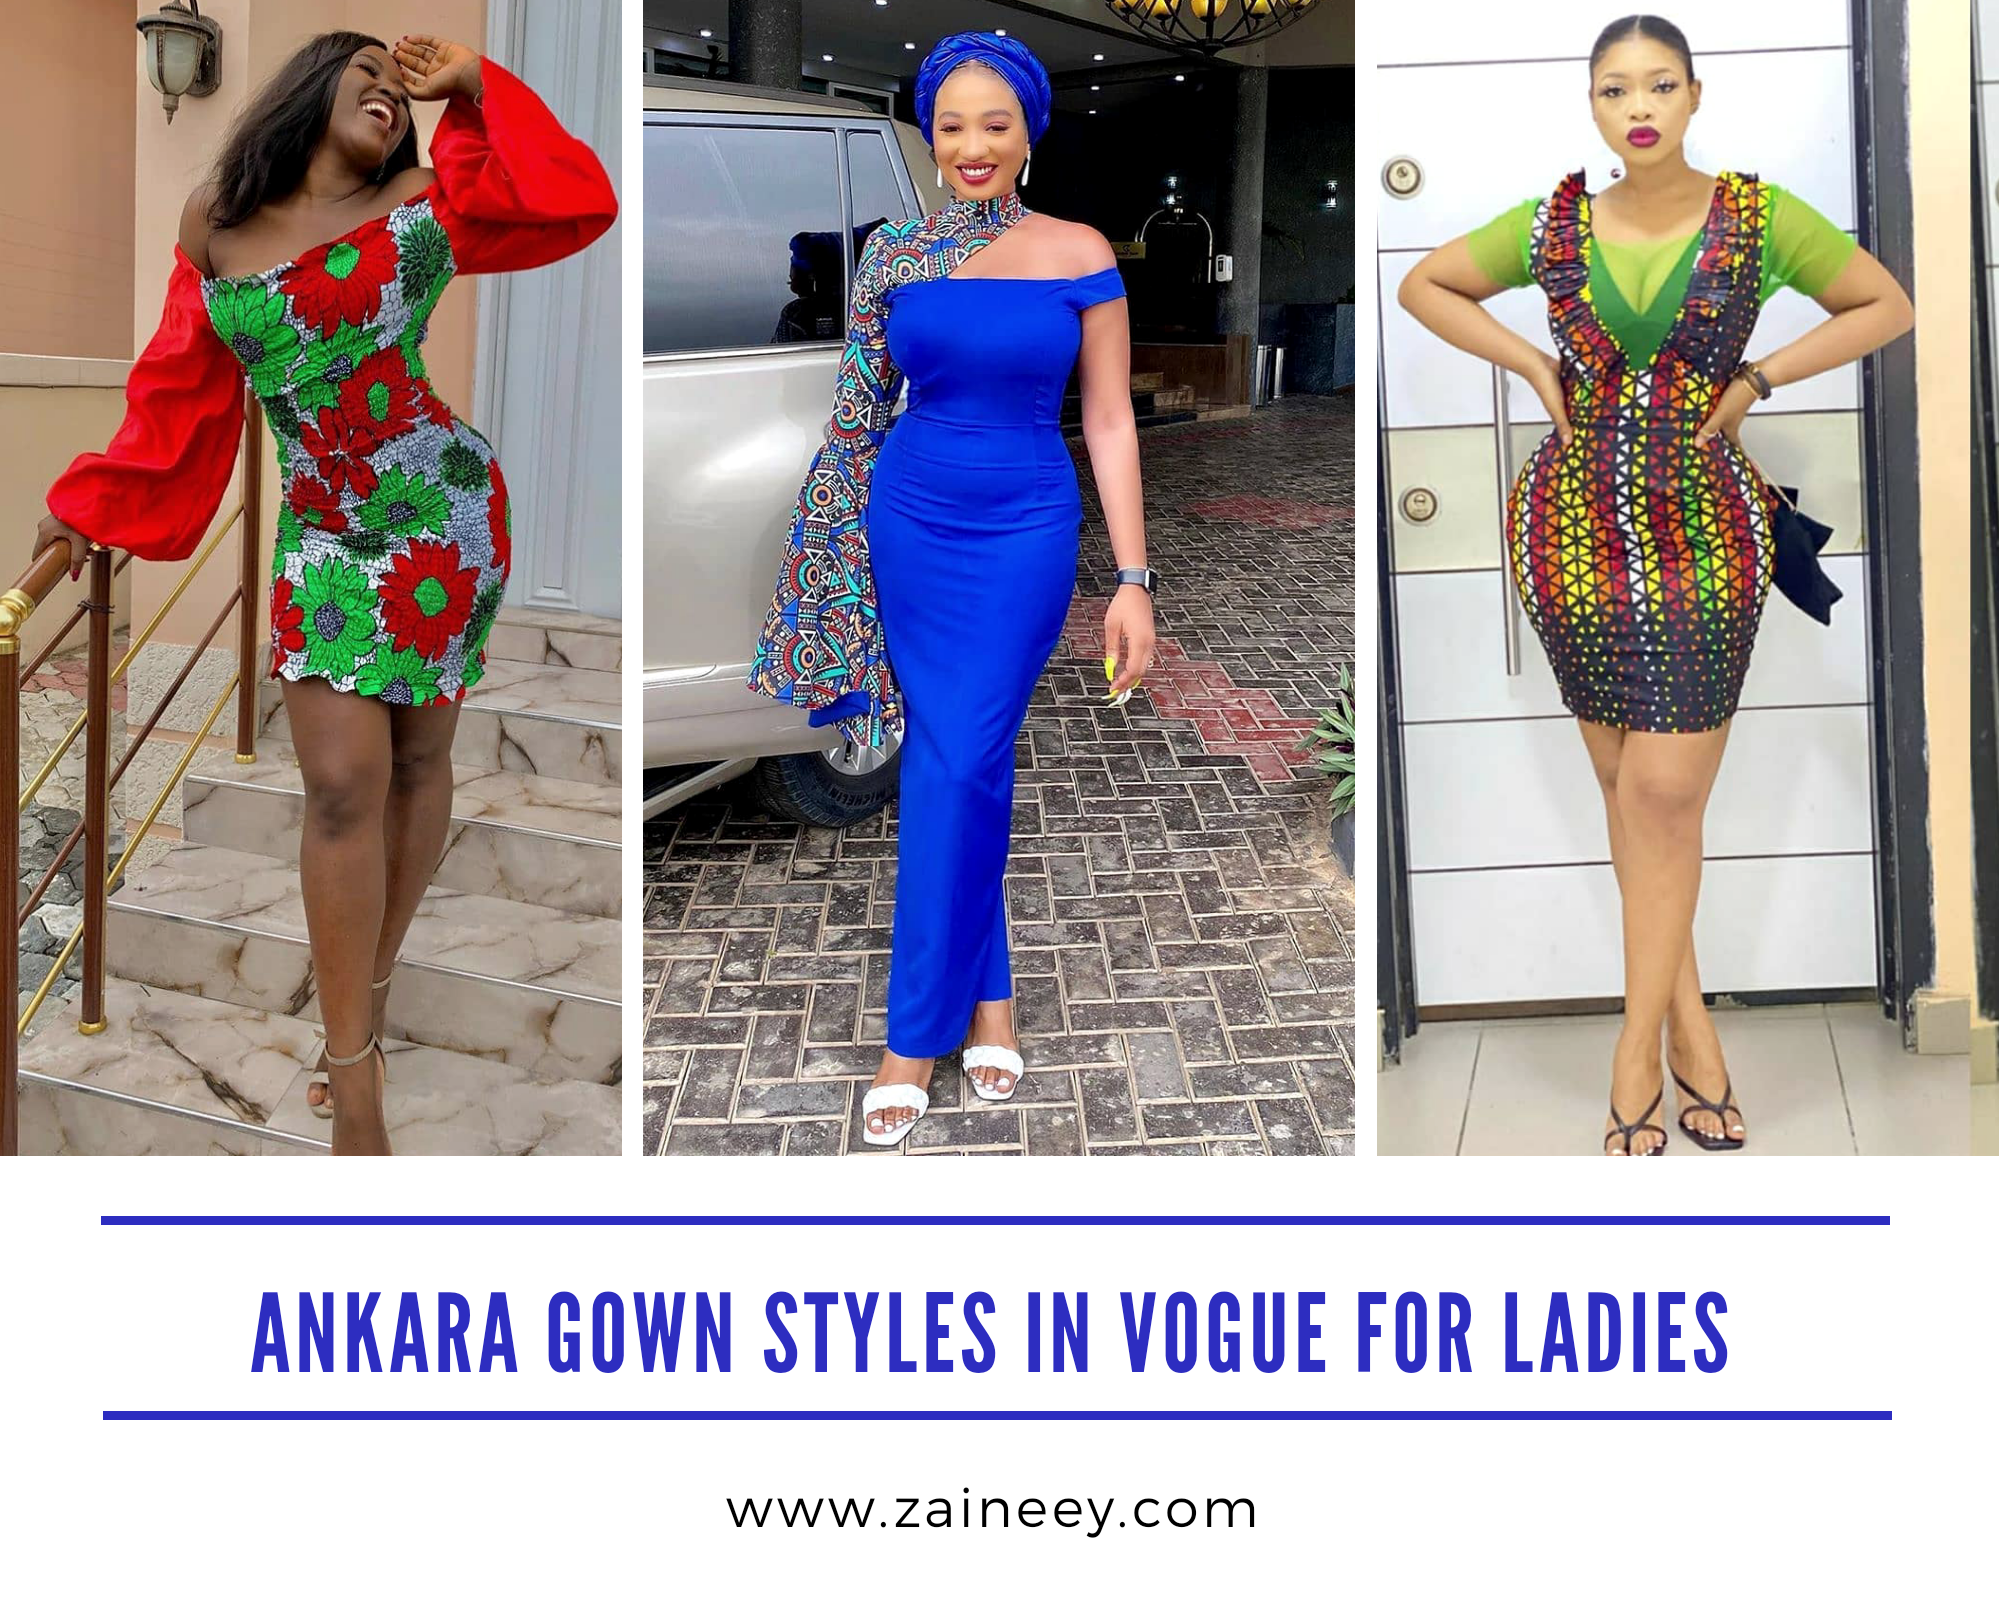 Fashionable, Chic, and Elegant Ankara Gown Styles in Vogue for Ladies.